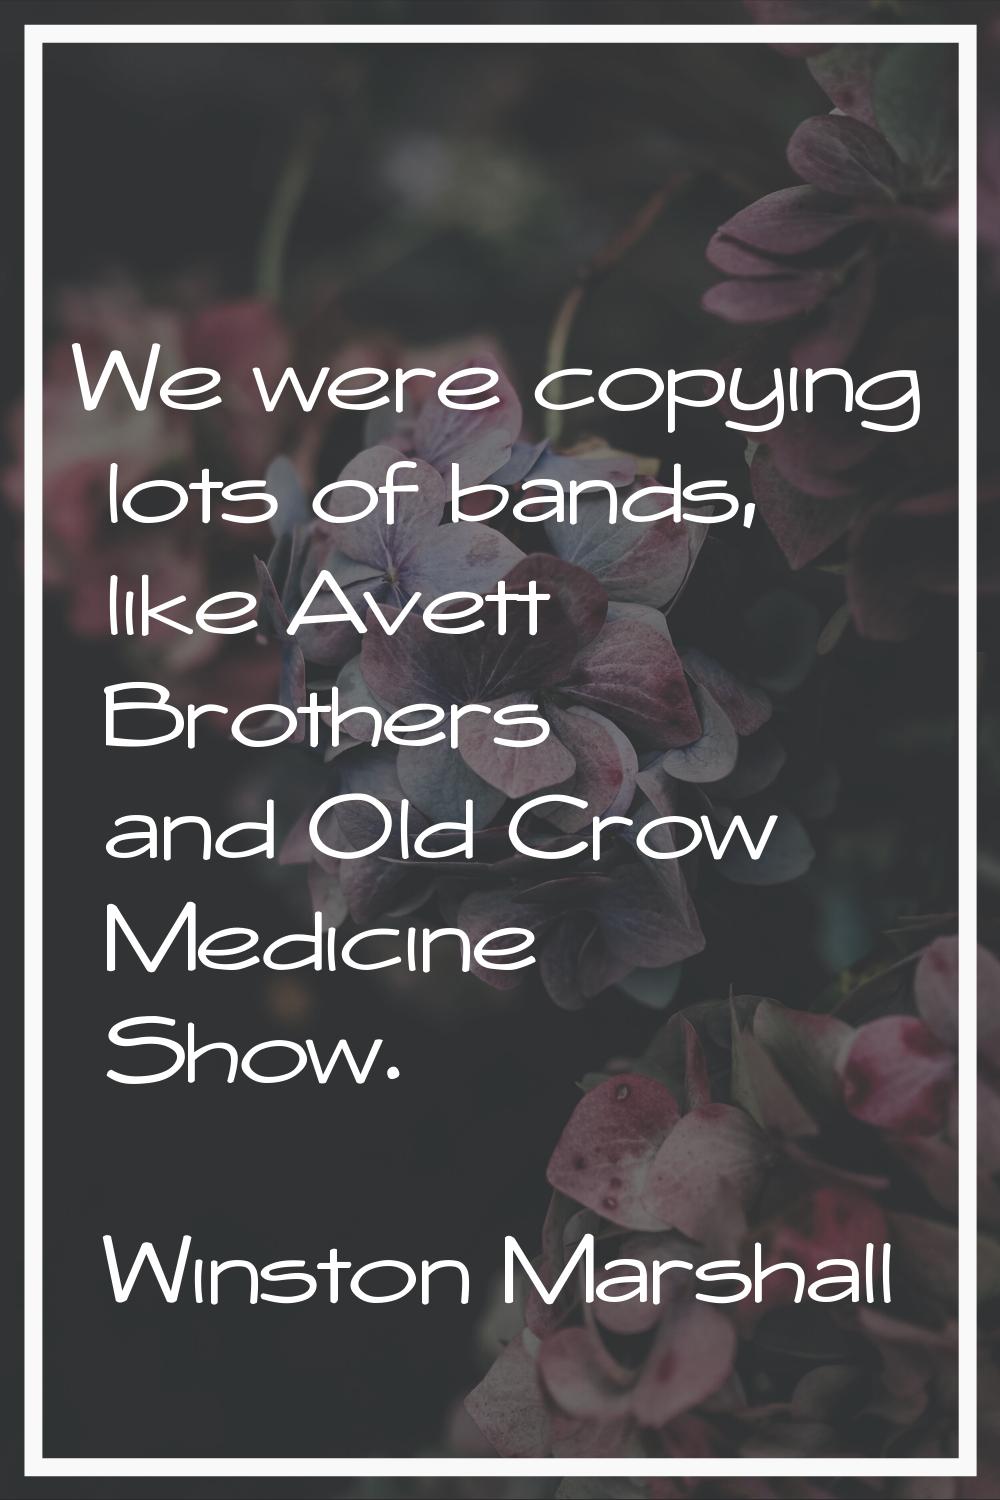 We were copying lots of bands, like Avett Brothers and Old Crow Medicine Show.